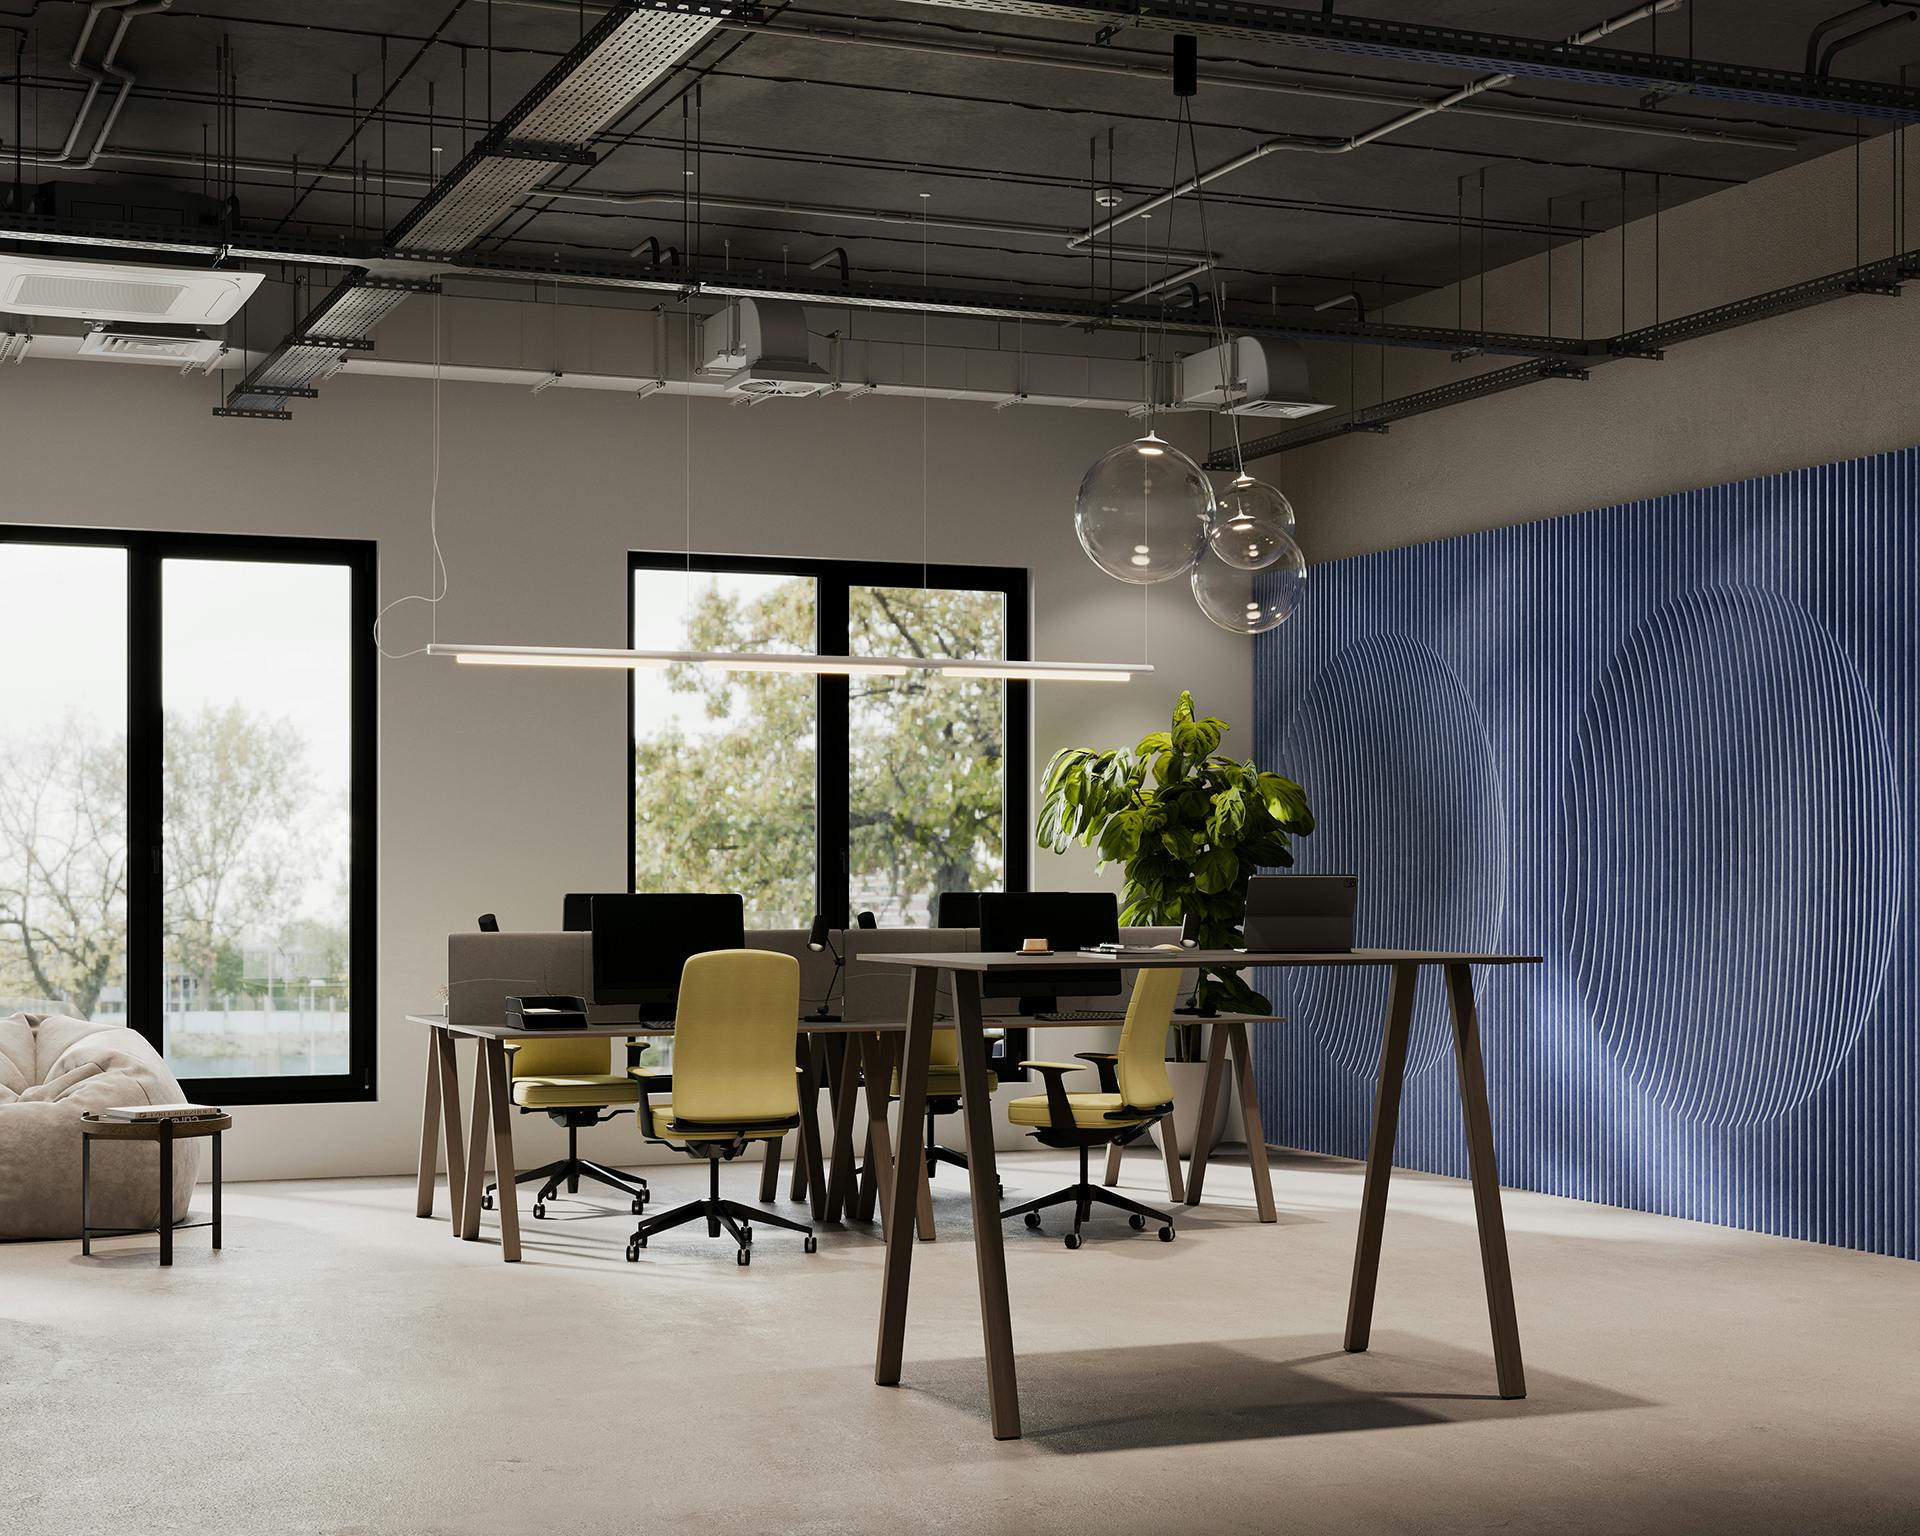 A modern office space featuring multiple desks with computers and green chairs. A tall table with a laptop is positioned in the foreground, and a leafy green plant adds a touch of nature. Large windows and a blue textured wall enhance the room's contemporary feel.